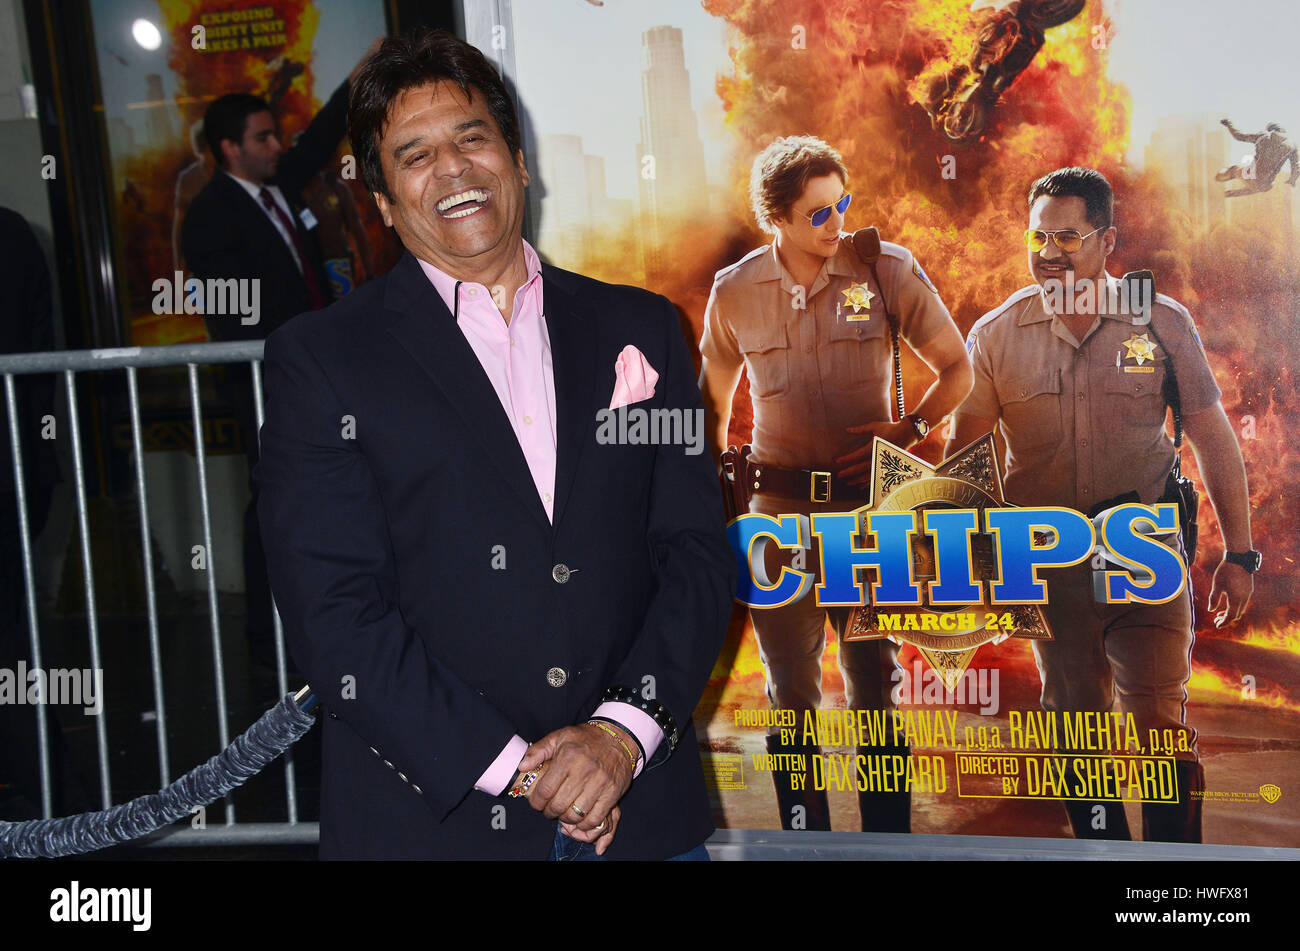 Los Angeles, USA. 20th Mar, 2017. Erik Estrada 063 arriving at the CHIPS Premiere at the TCL Chinese Theatre in Los Angeles. March 20, 2017. Credit: Tsuni/USA/Alamy Live News Stock Photo